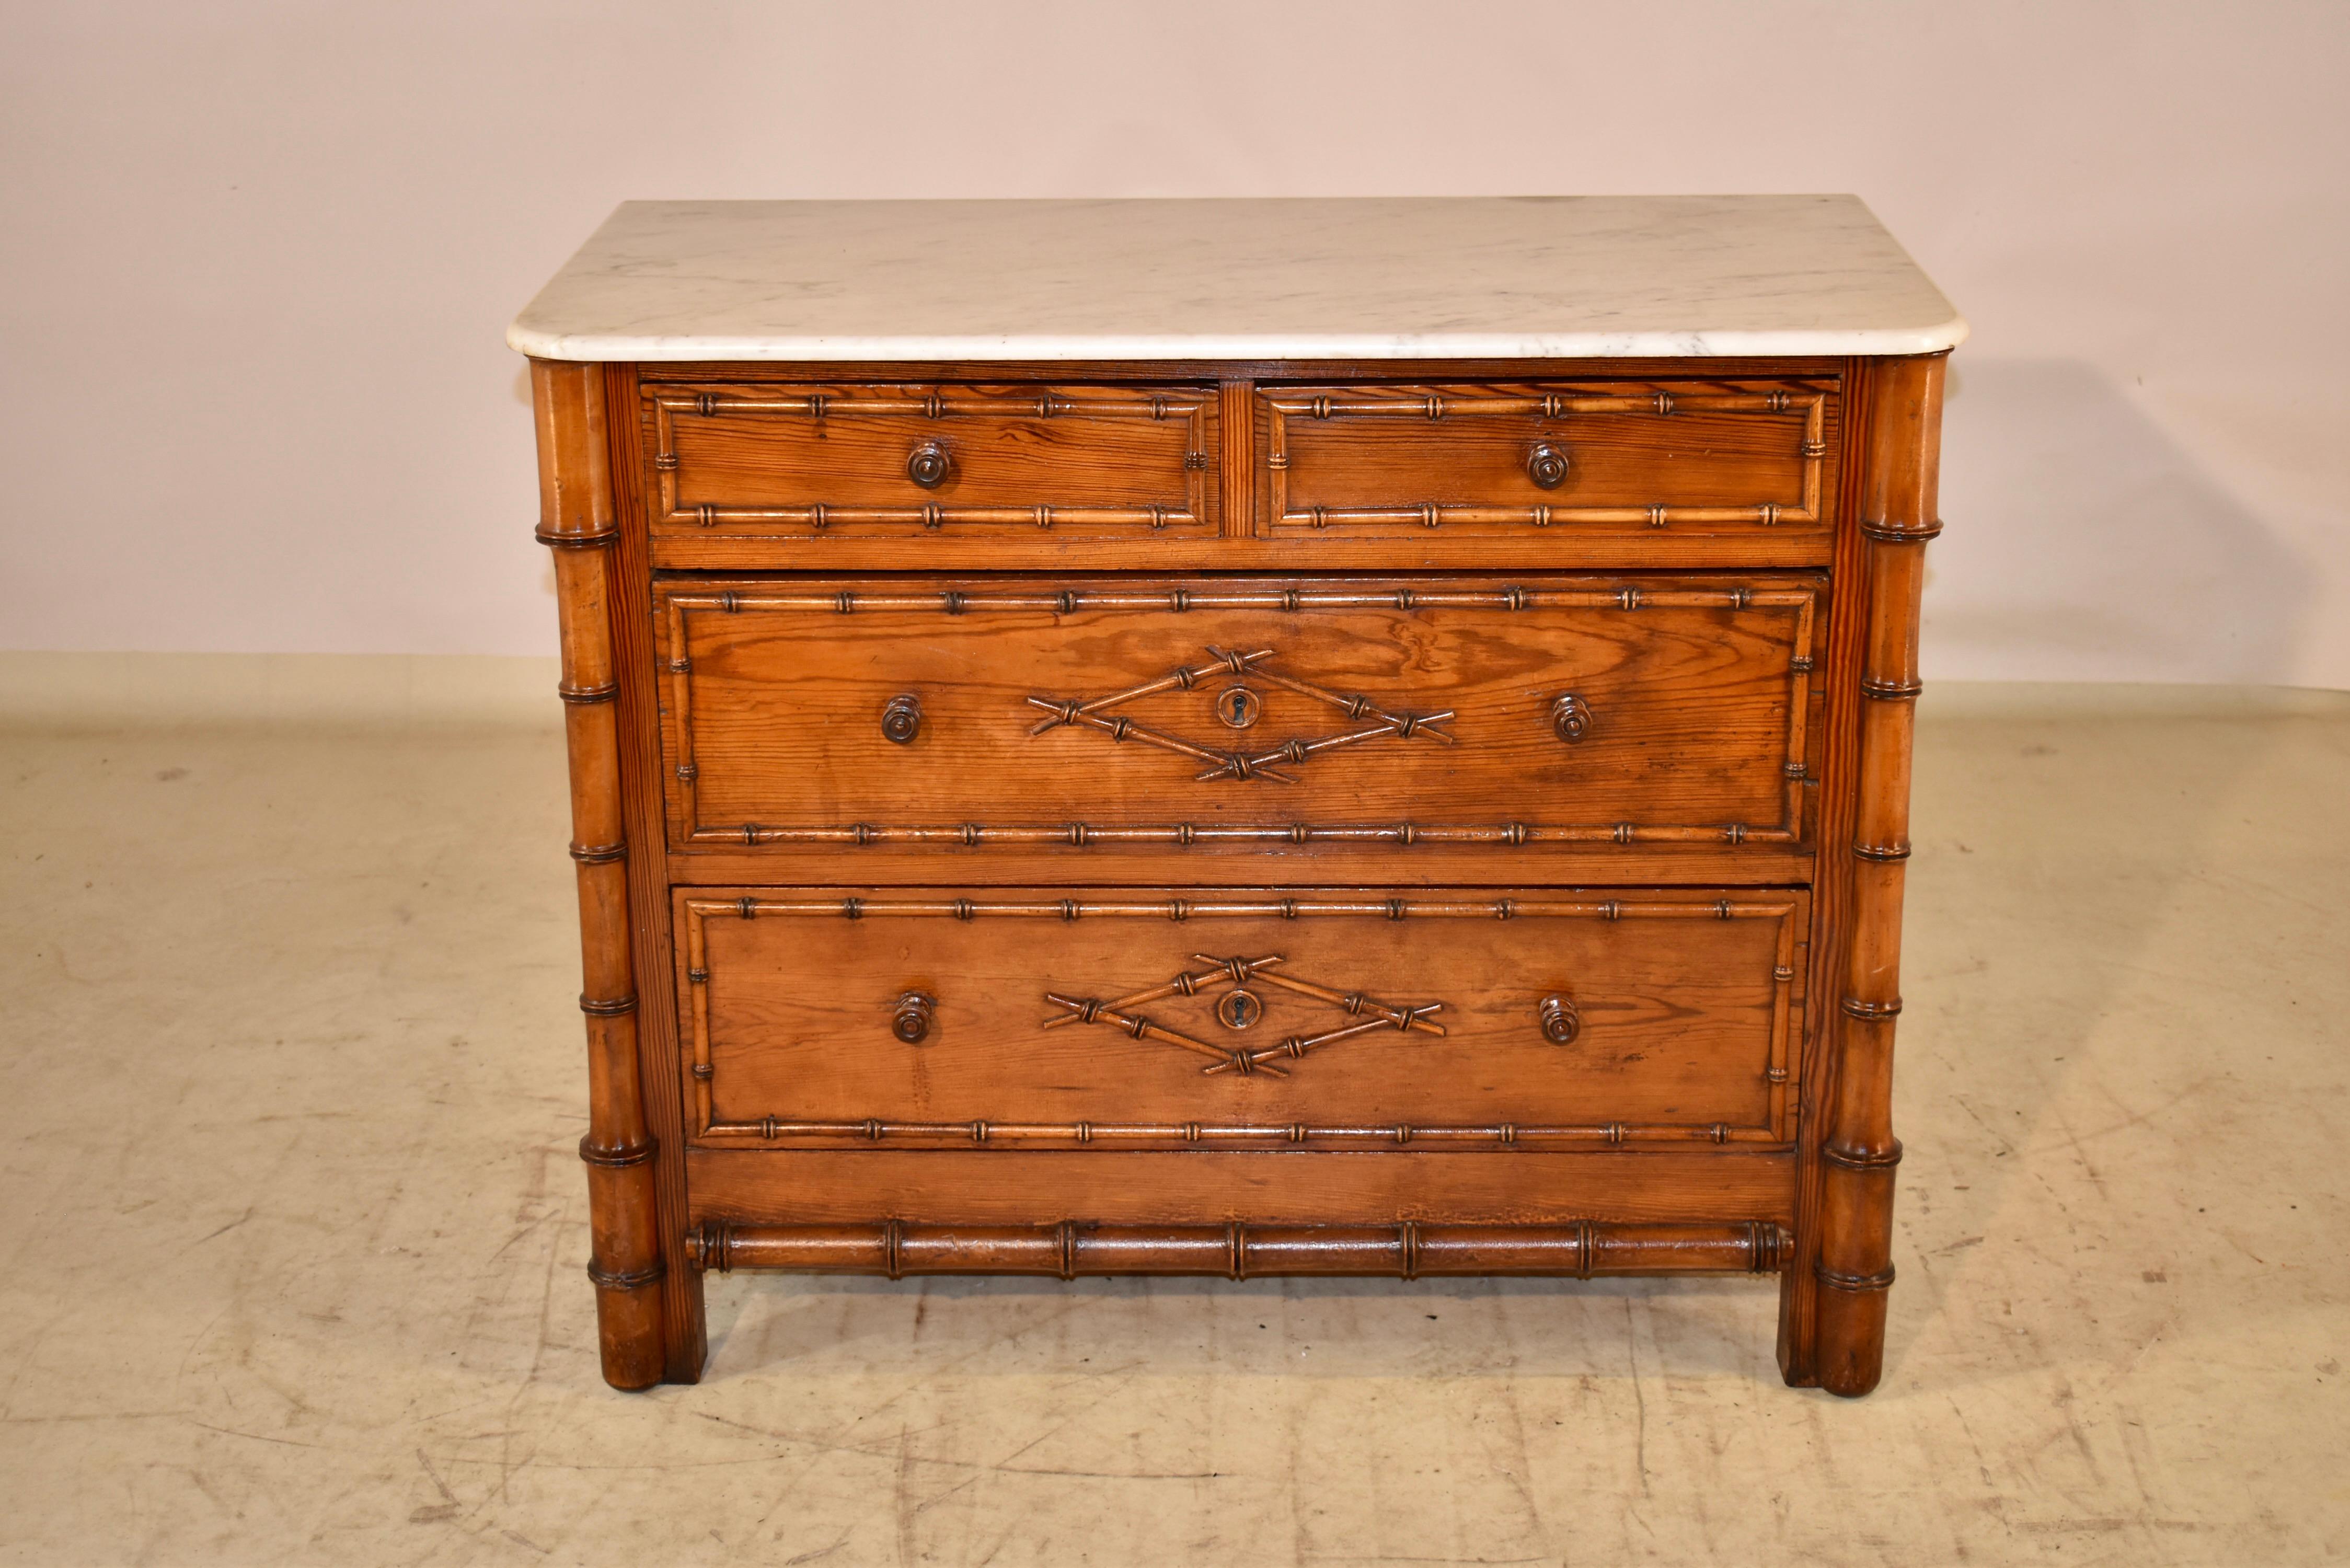 19th century pitch pine chest of drawers with faux bamboo decorative accents.  The top is made from Carrara marble, sitting on top of a lovely case.  The case has paneled sides with faux bamboo molding accents, and there are two drawers over two